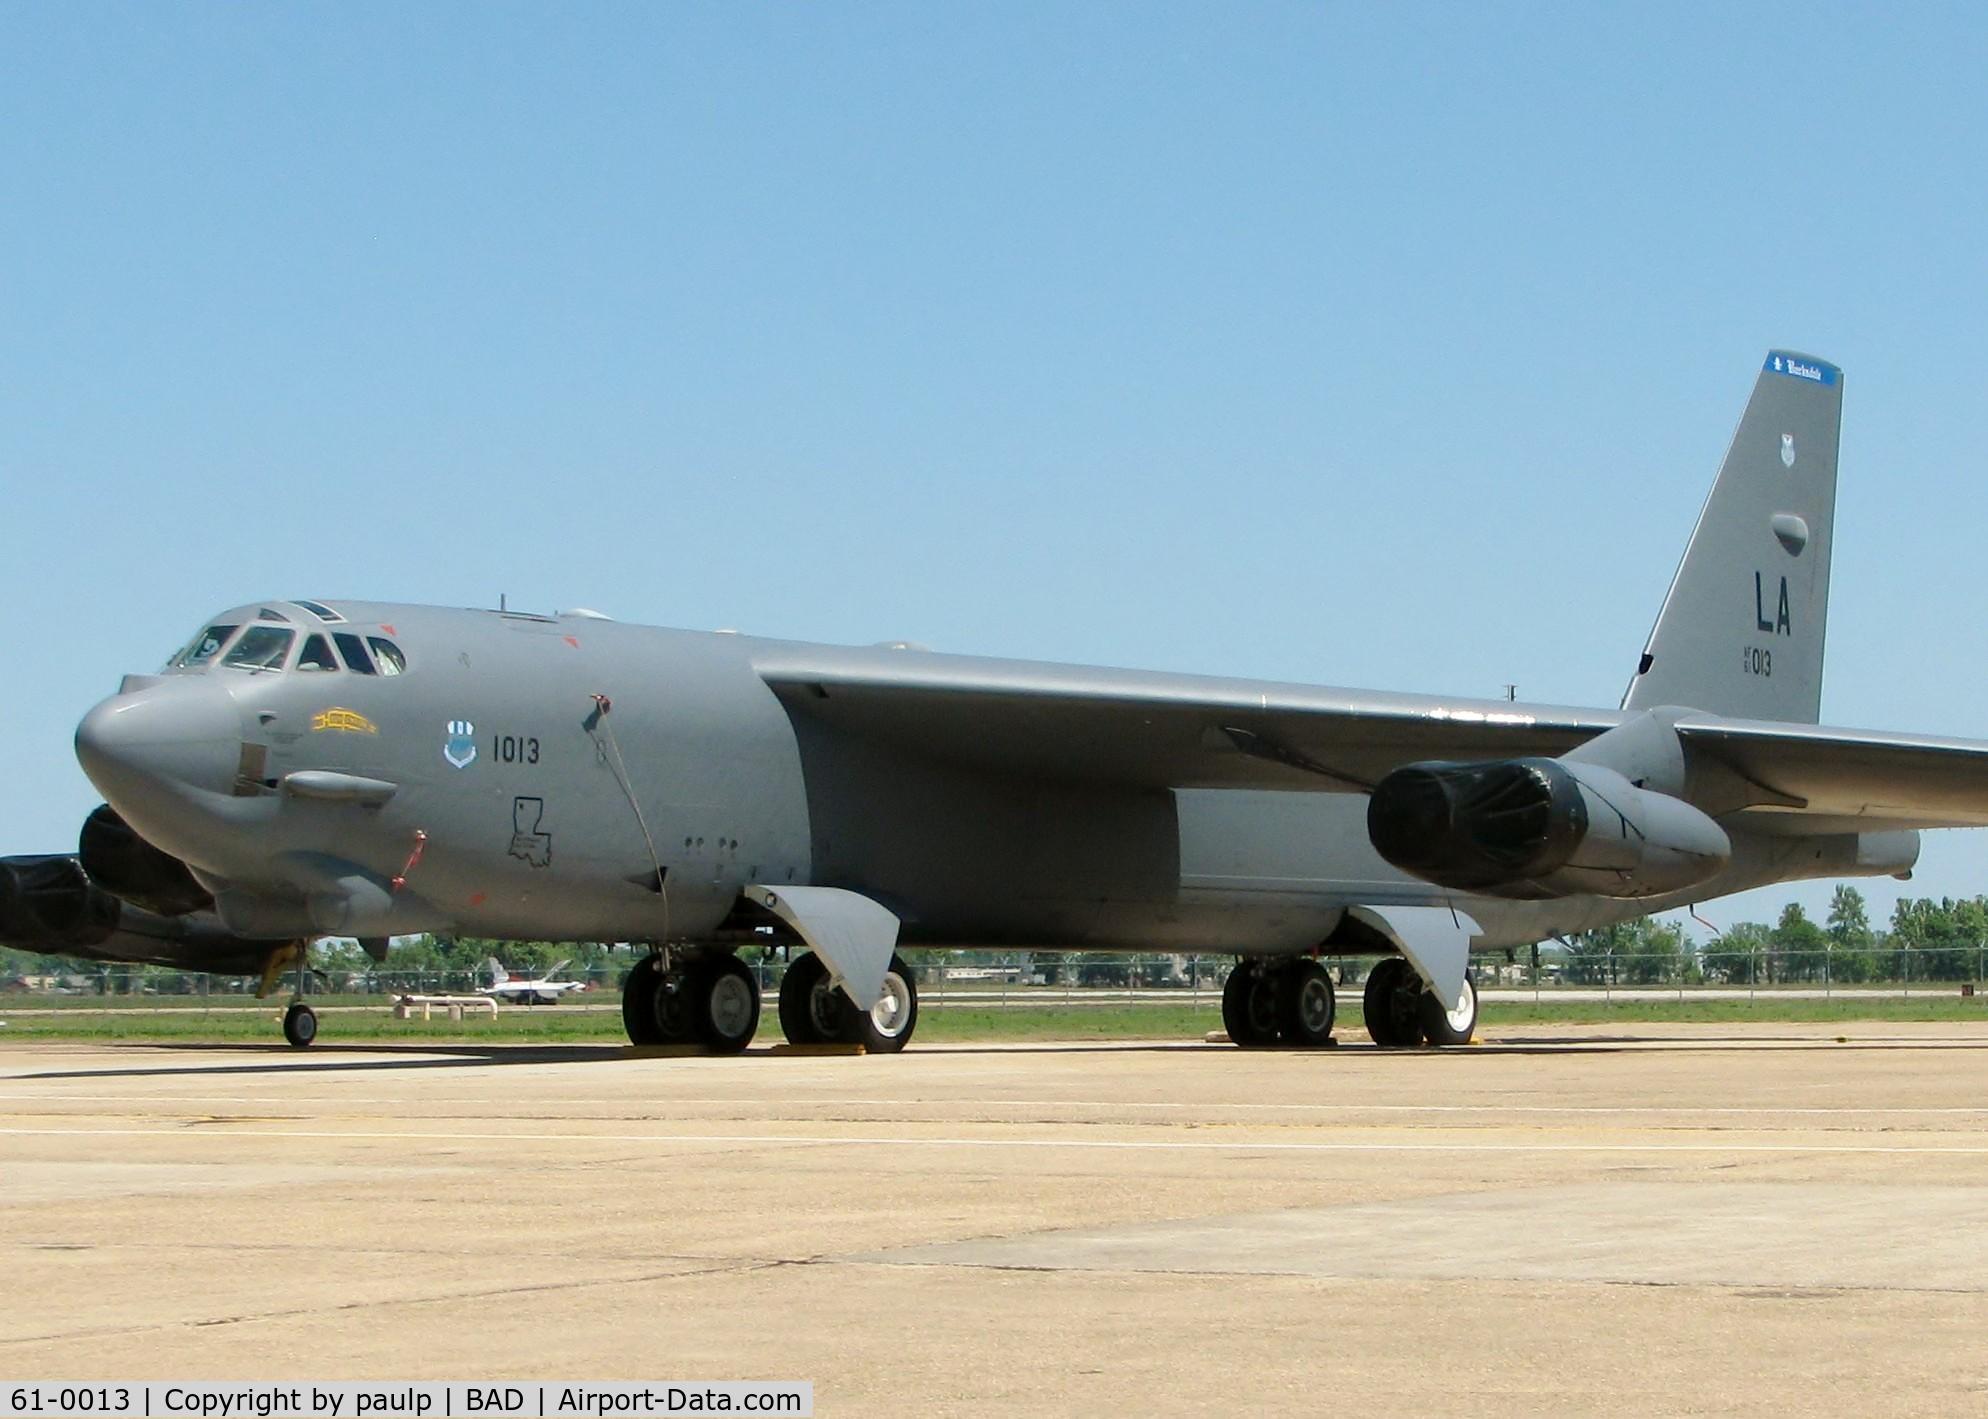 61-0013, 1961 Boeing B-52H Stratofortress C/N 464440, At Barksdale Air Force Base.